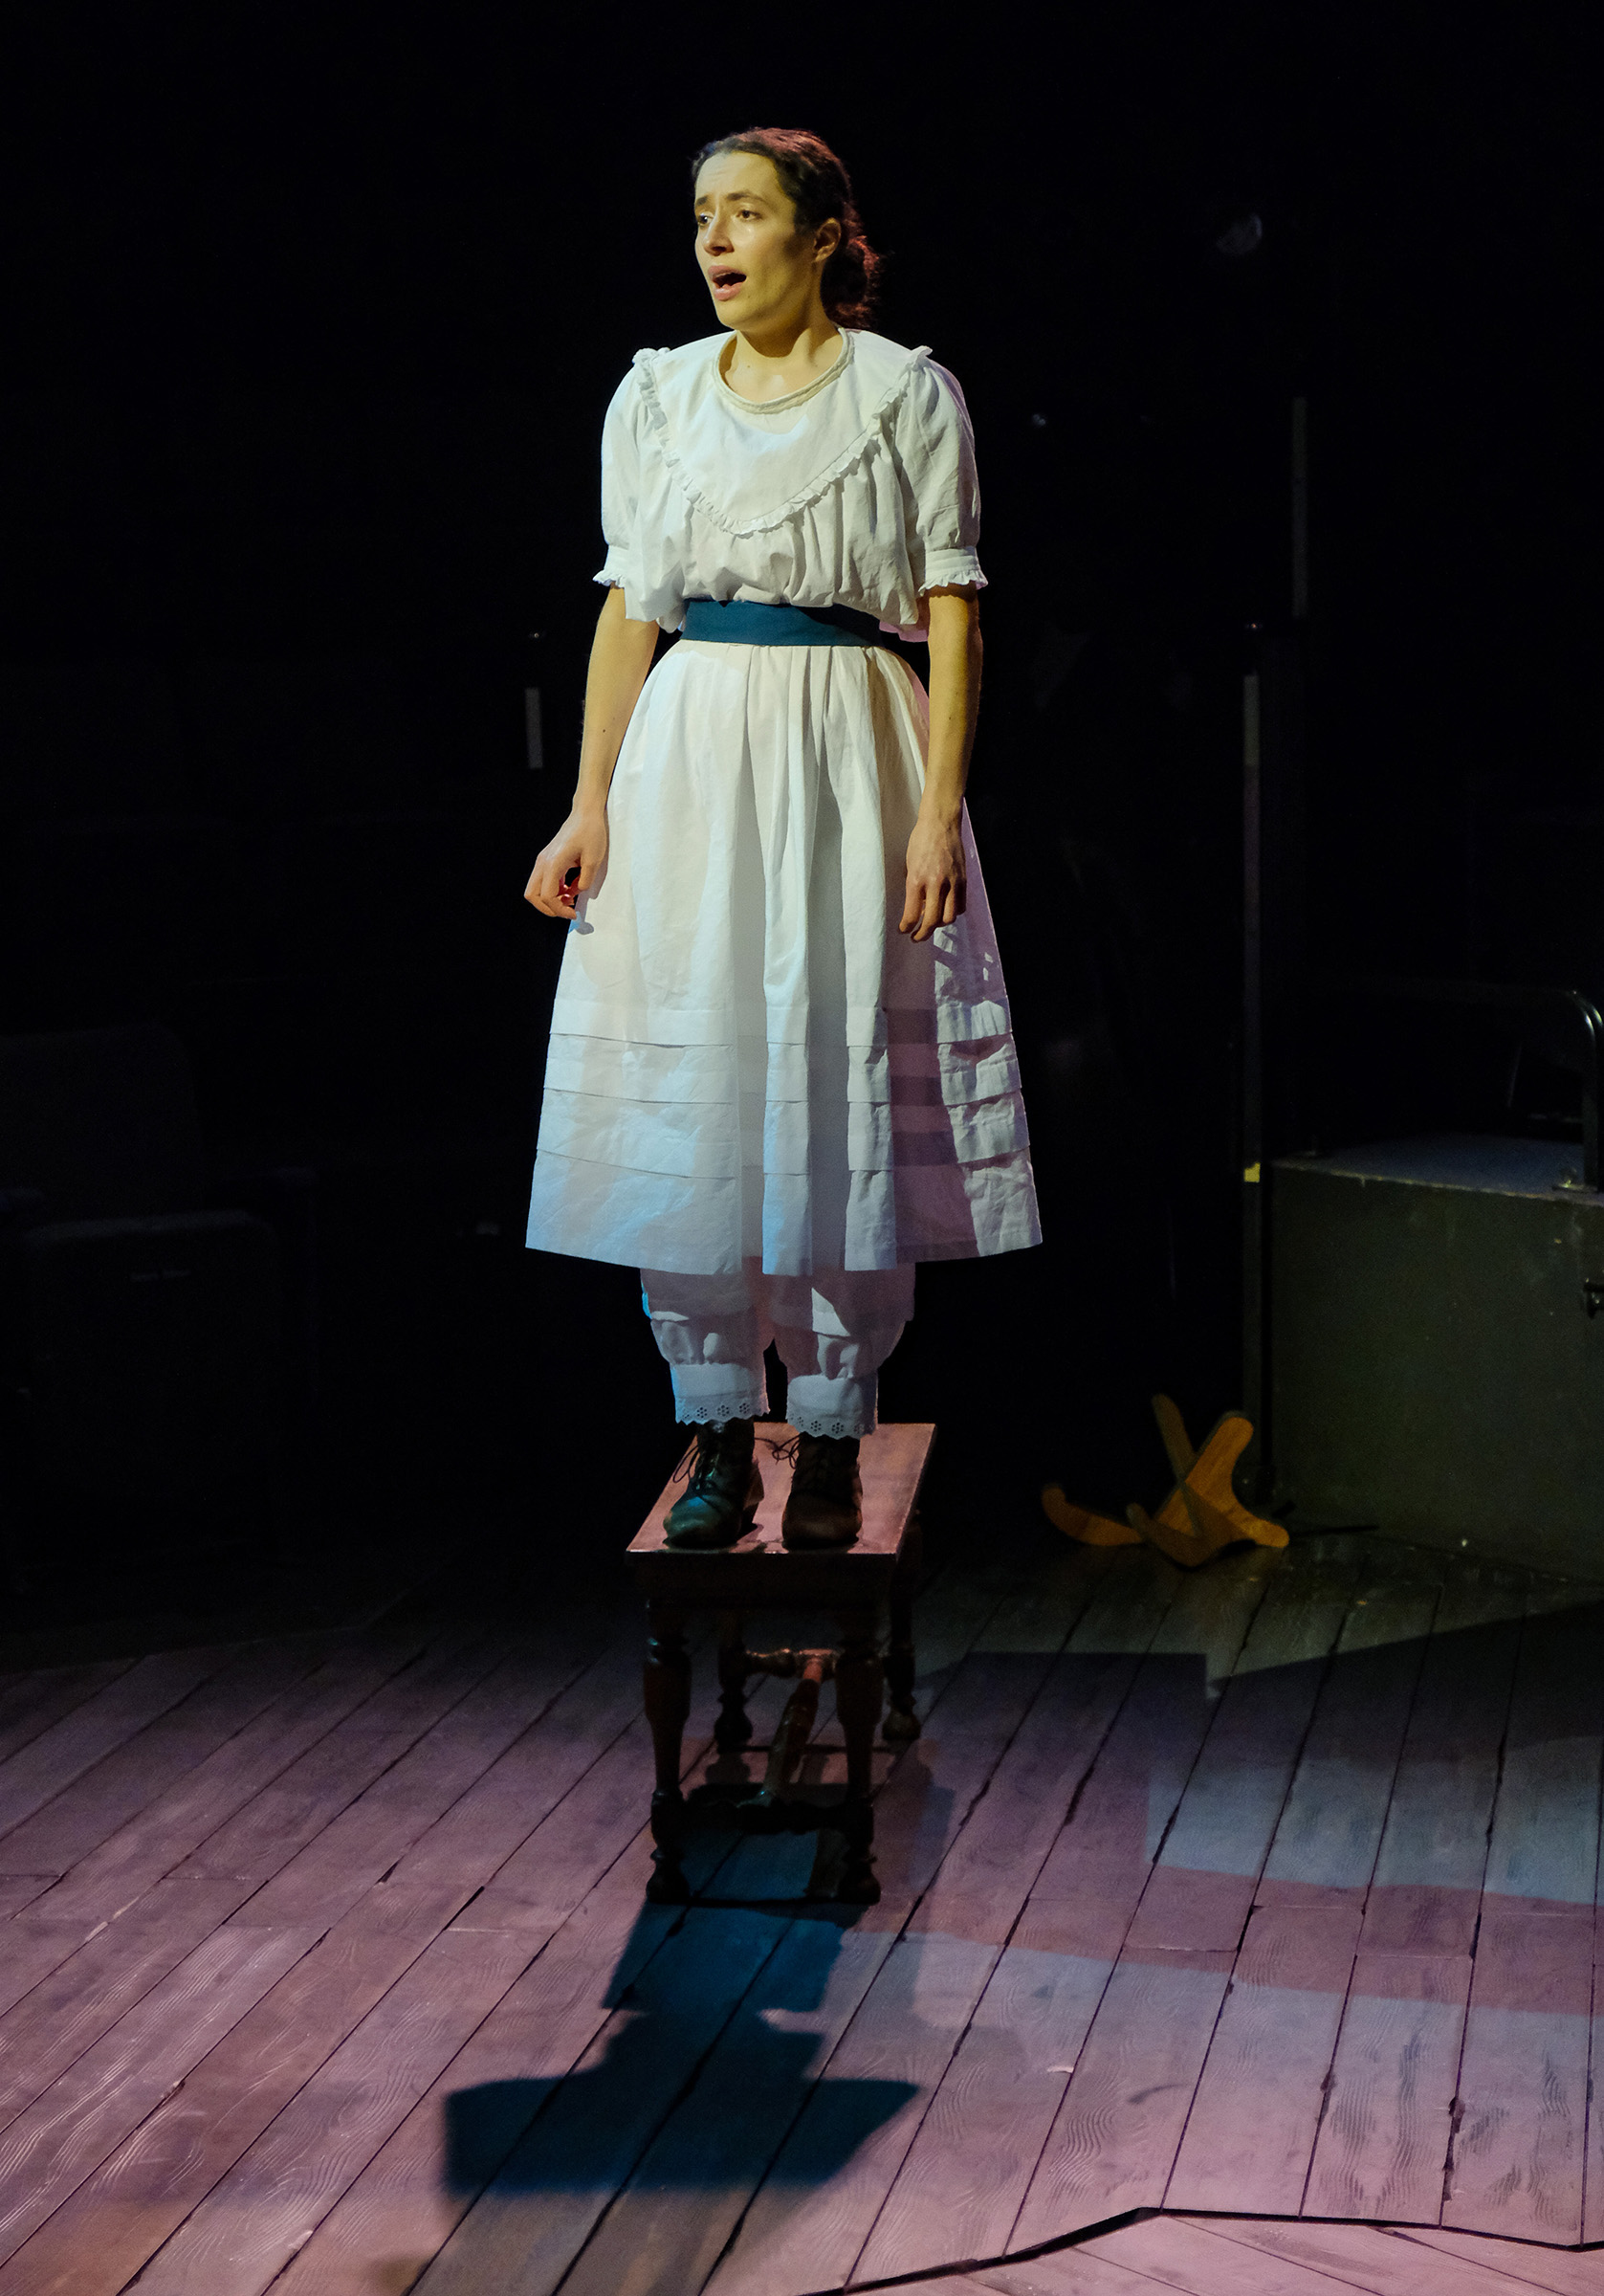 theatre performance image: Jane Eyre in a white dress is standing alone on a bench